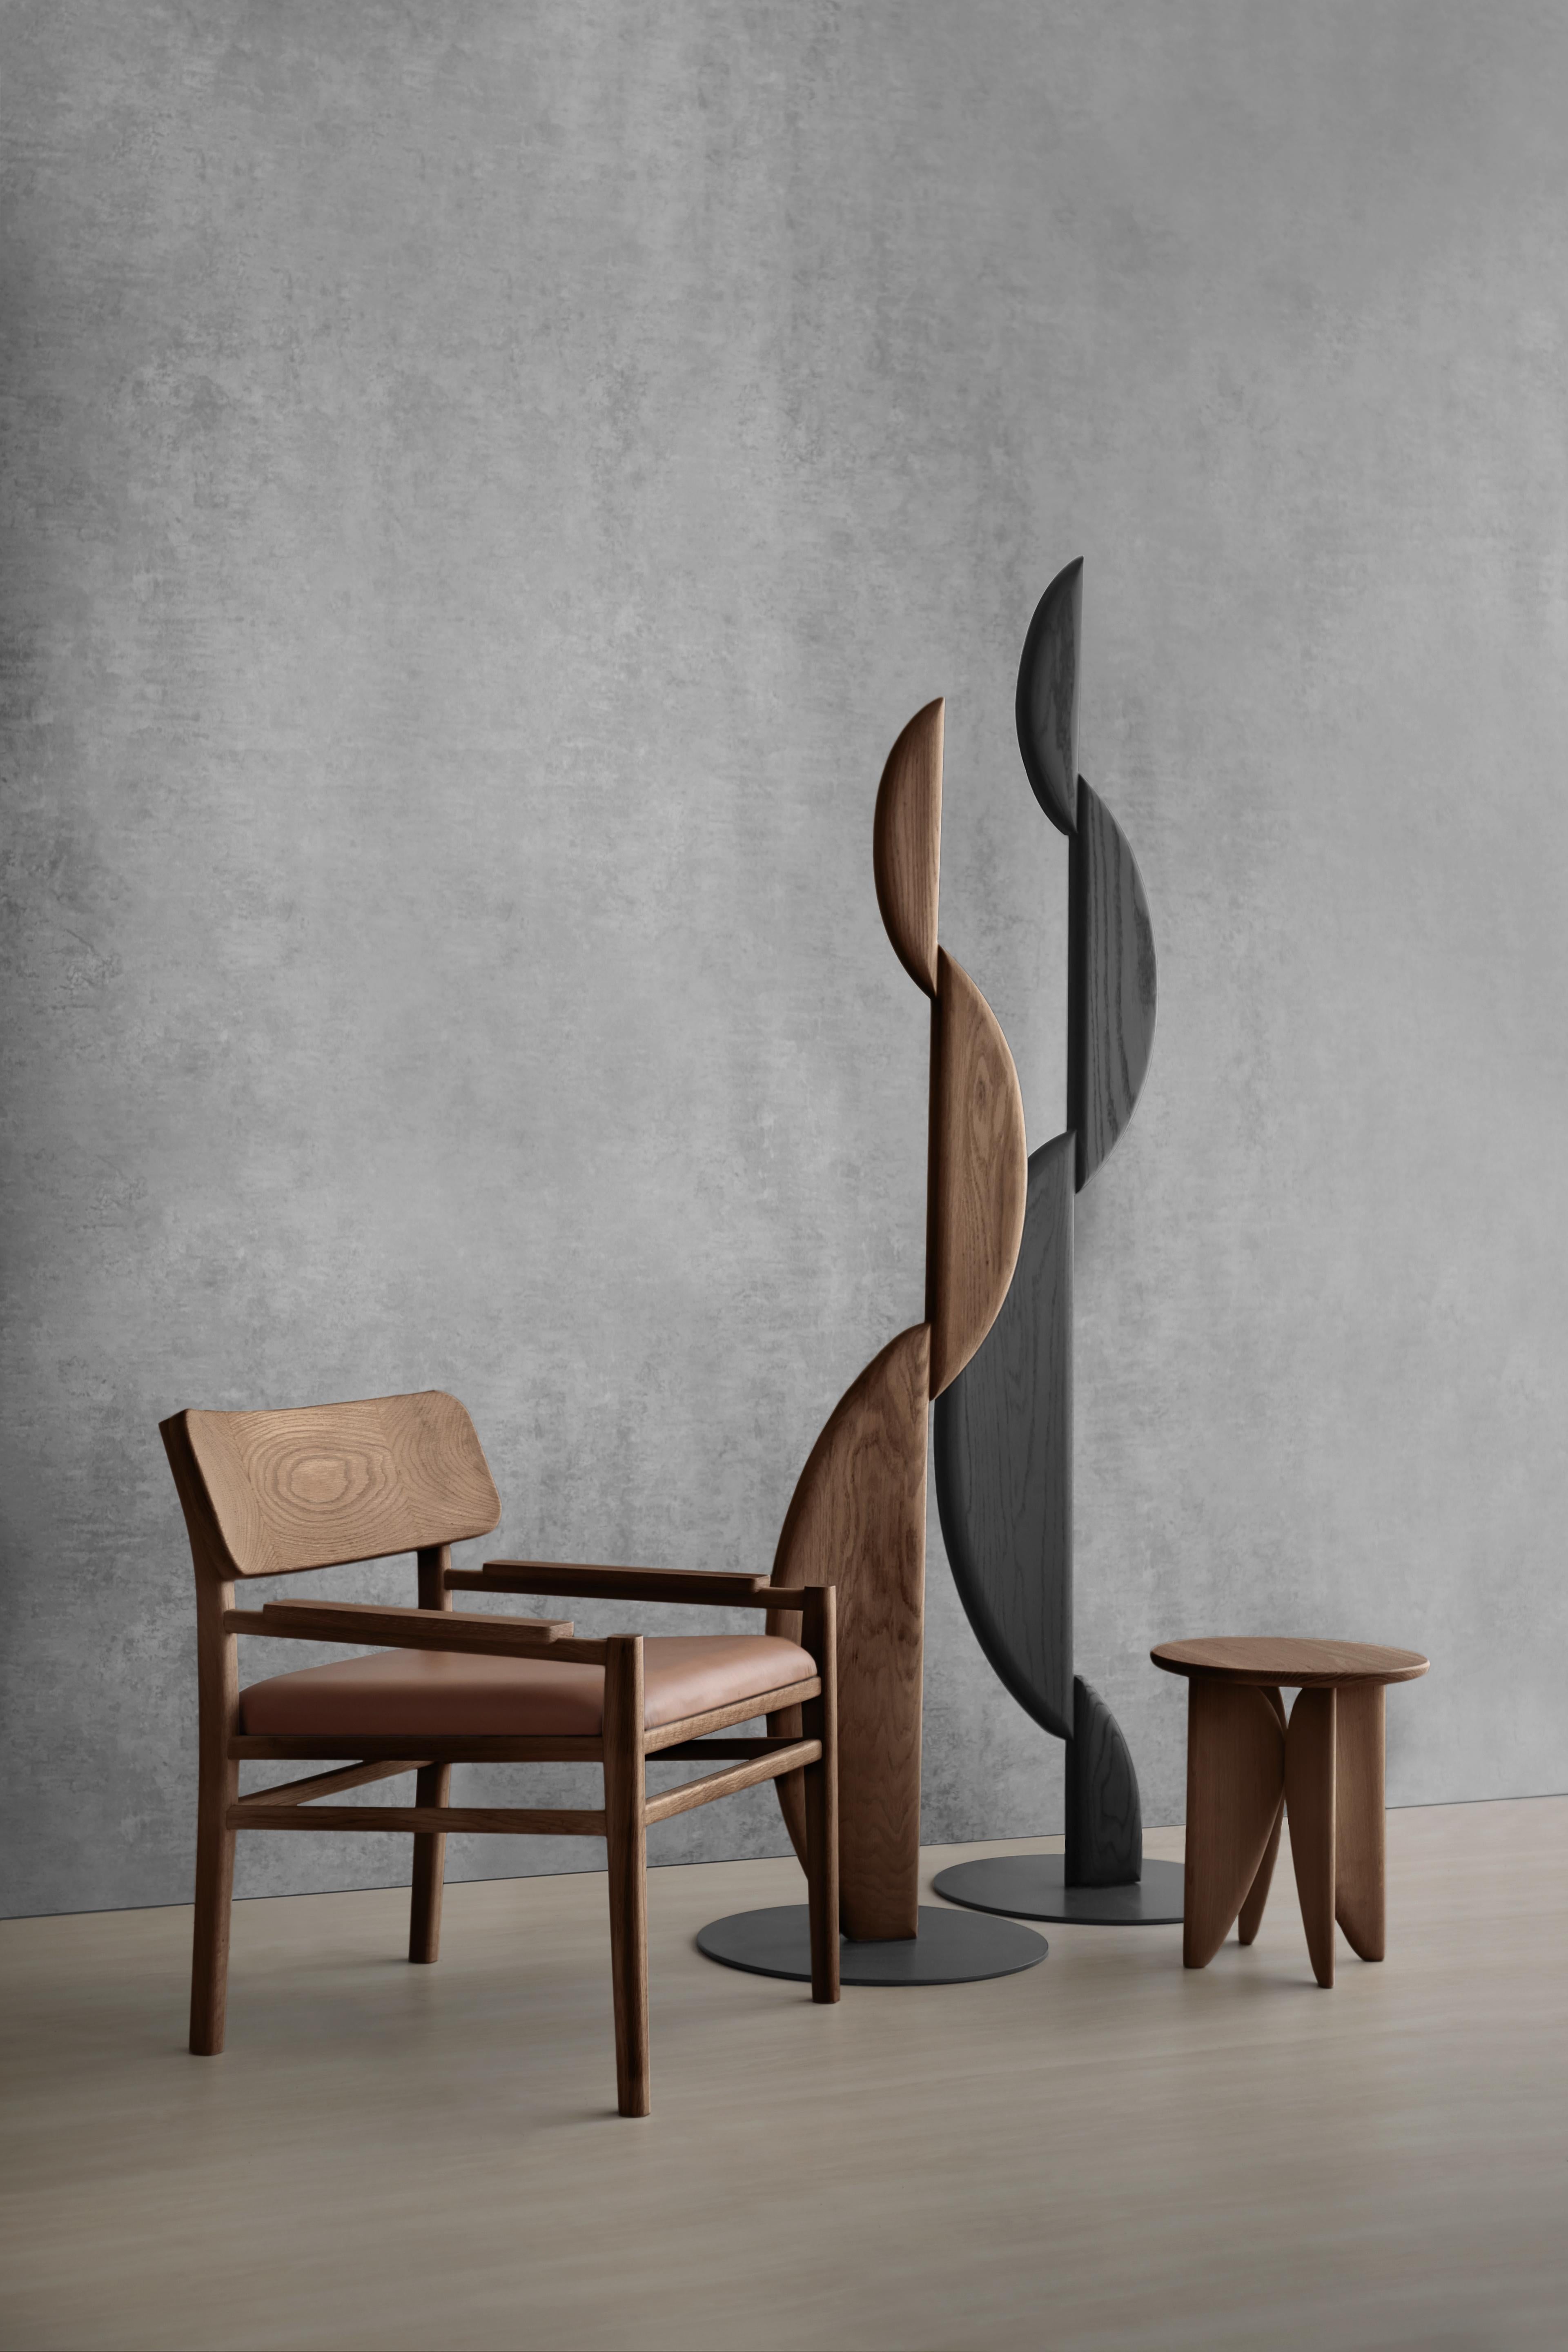 Mexican Noviembre I Standing Sculpture Inspired in Brancusi in Solid Walnut Wood by Joel For Sale